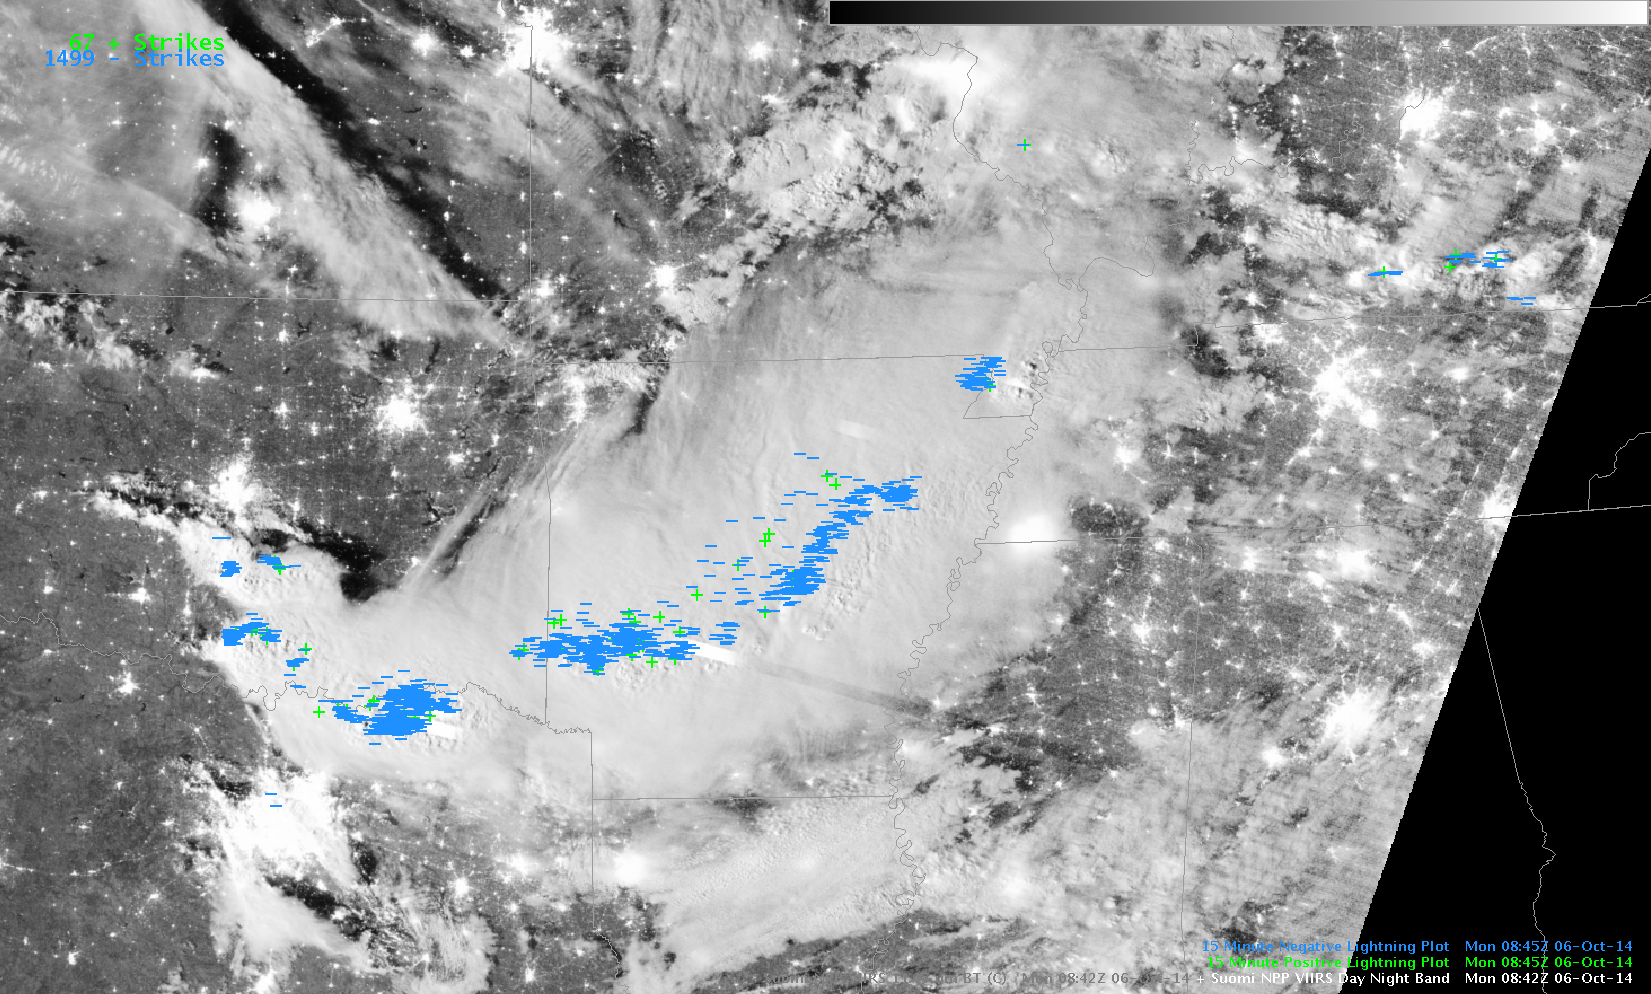 <strong>Suomi NPP VIIRS Day/Night Band (0.70 µm), Infrared Imagery (11.45 µm) and Day/Night Band imagery with lightning strikes at 0842 UTC on 6 October 2014</strong> (click to animate)